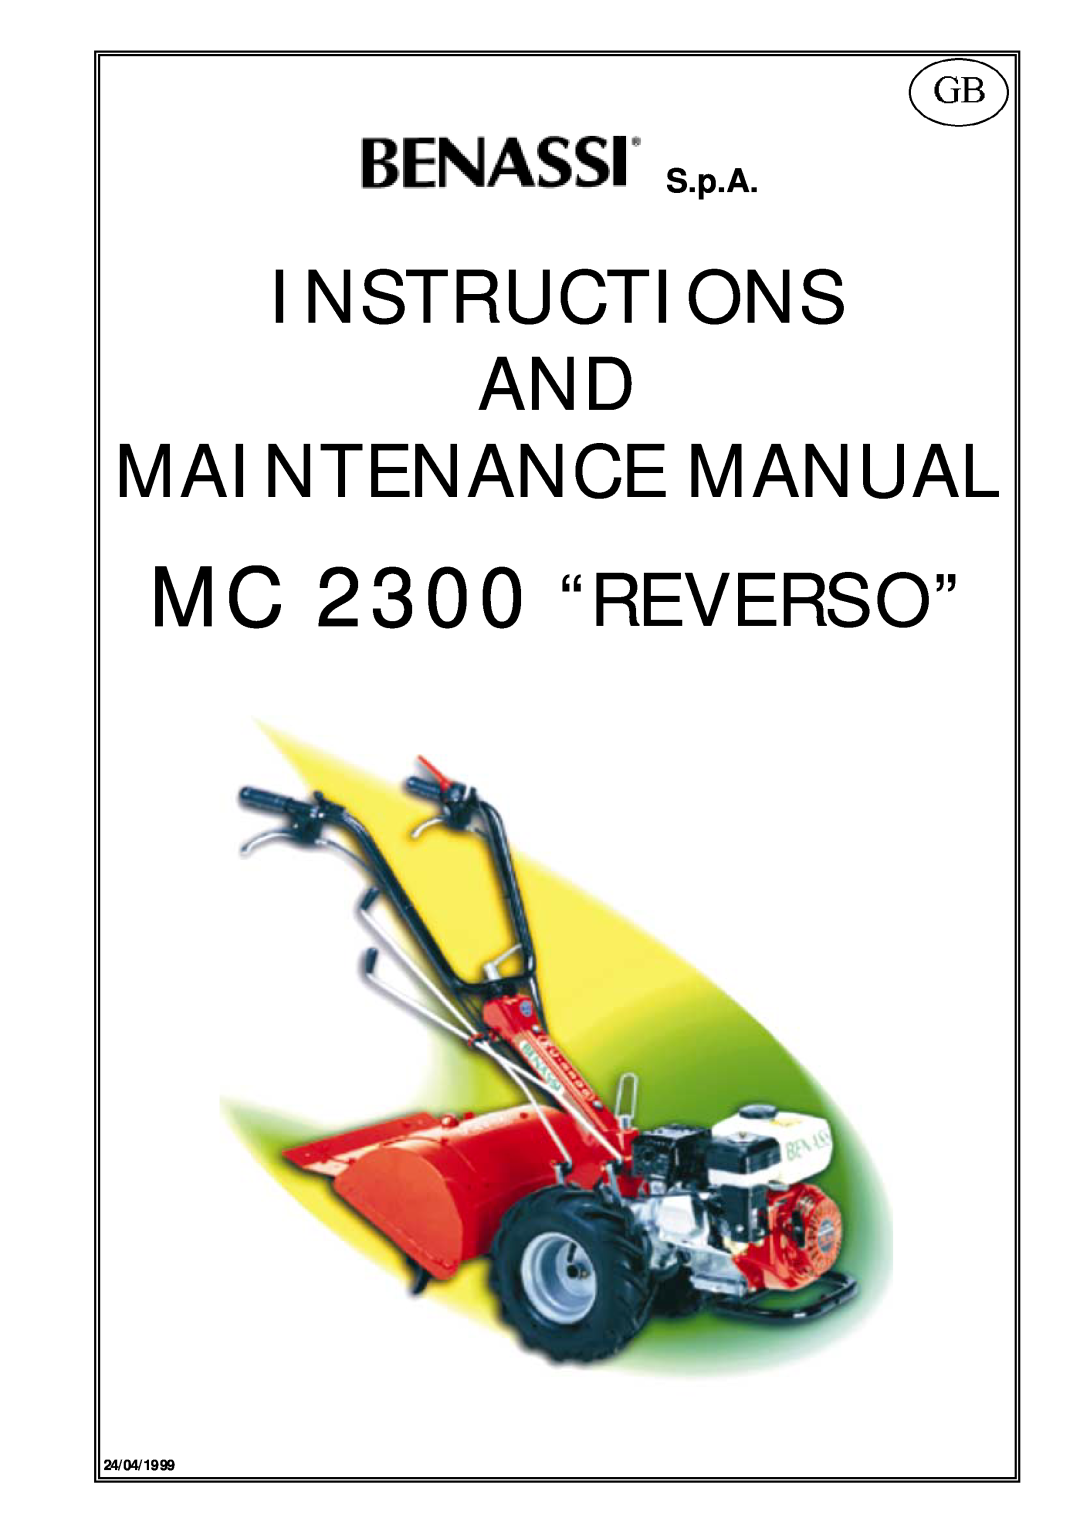 Briggs & Stratton manual Instructions And Maintenance Manual, MC 2300 “REVERSO”, S.p.A, 24/04/1999 